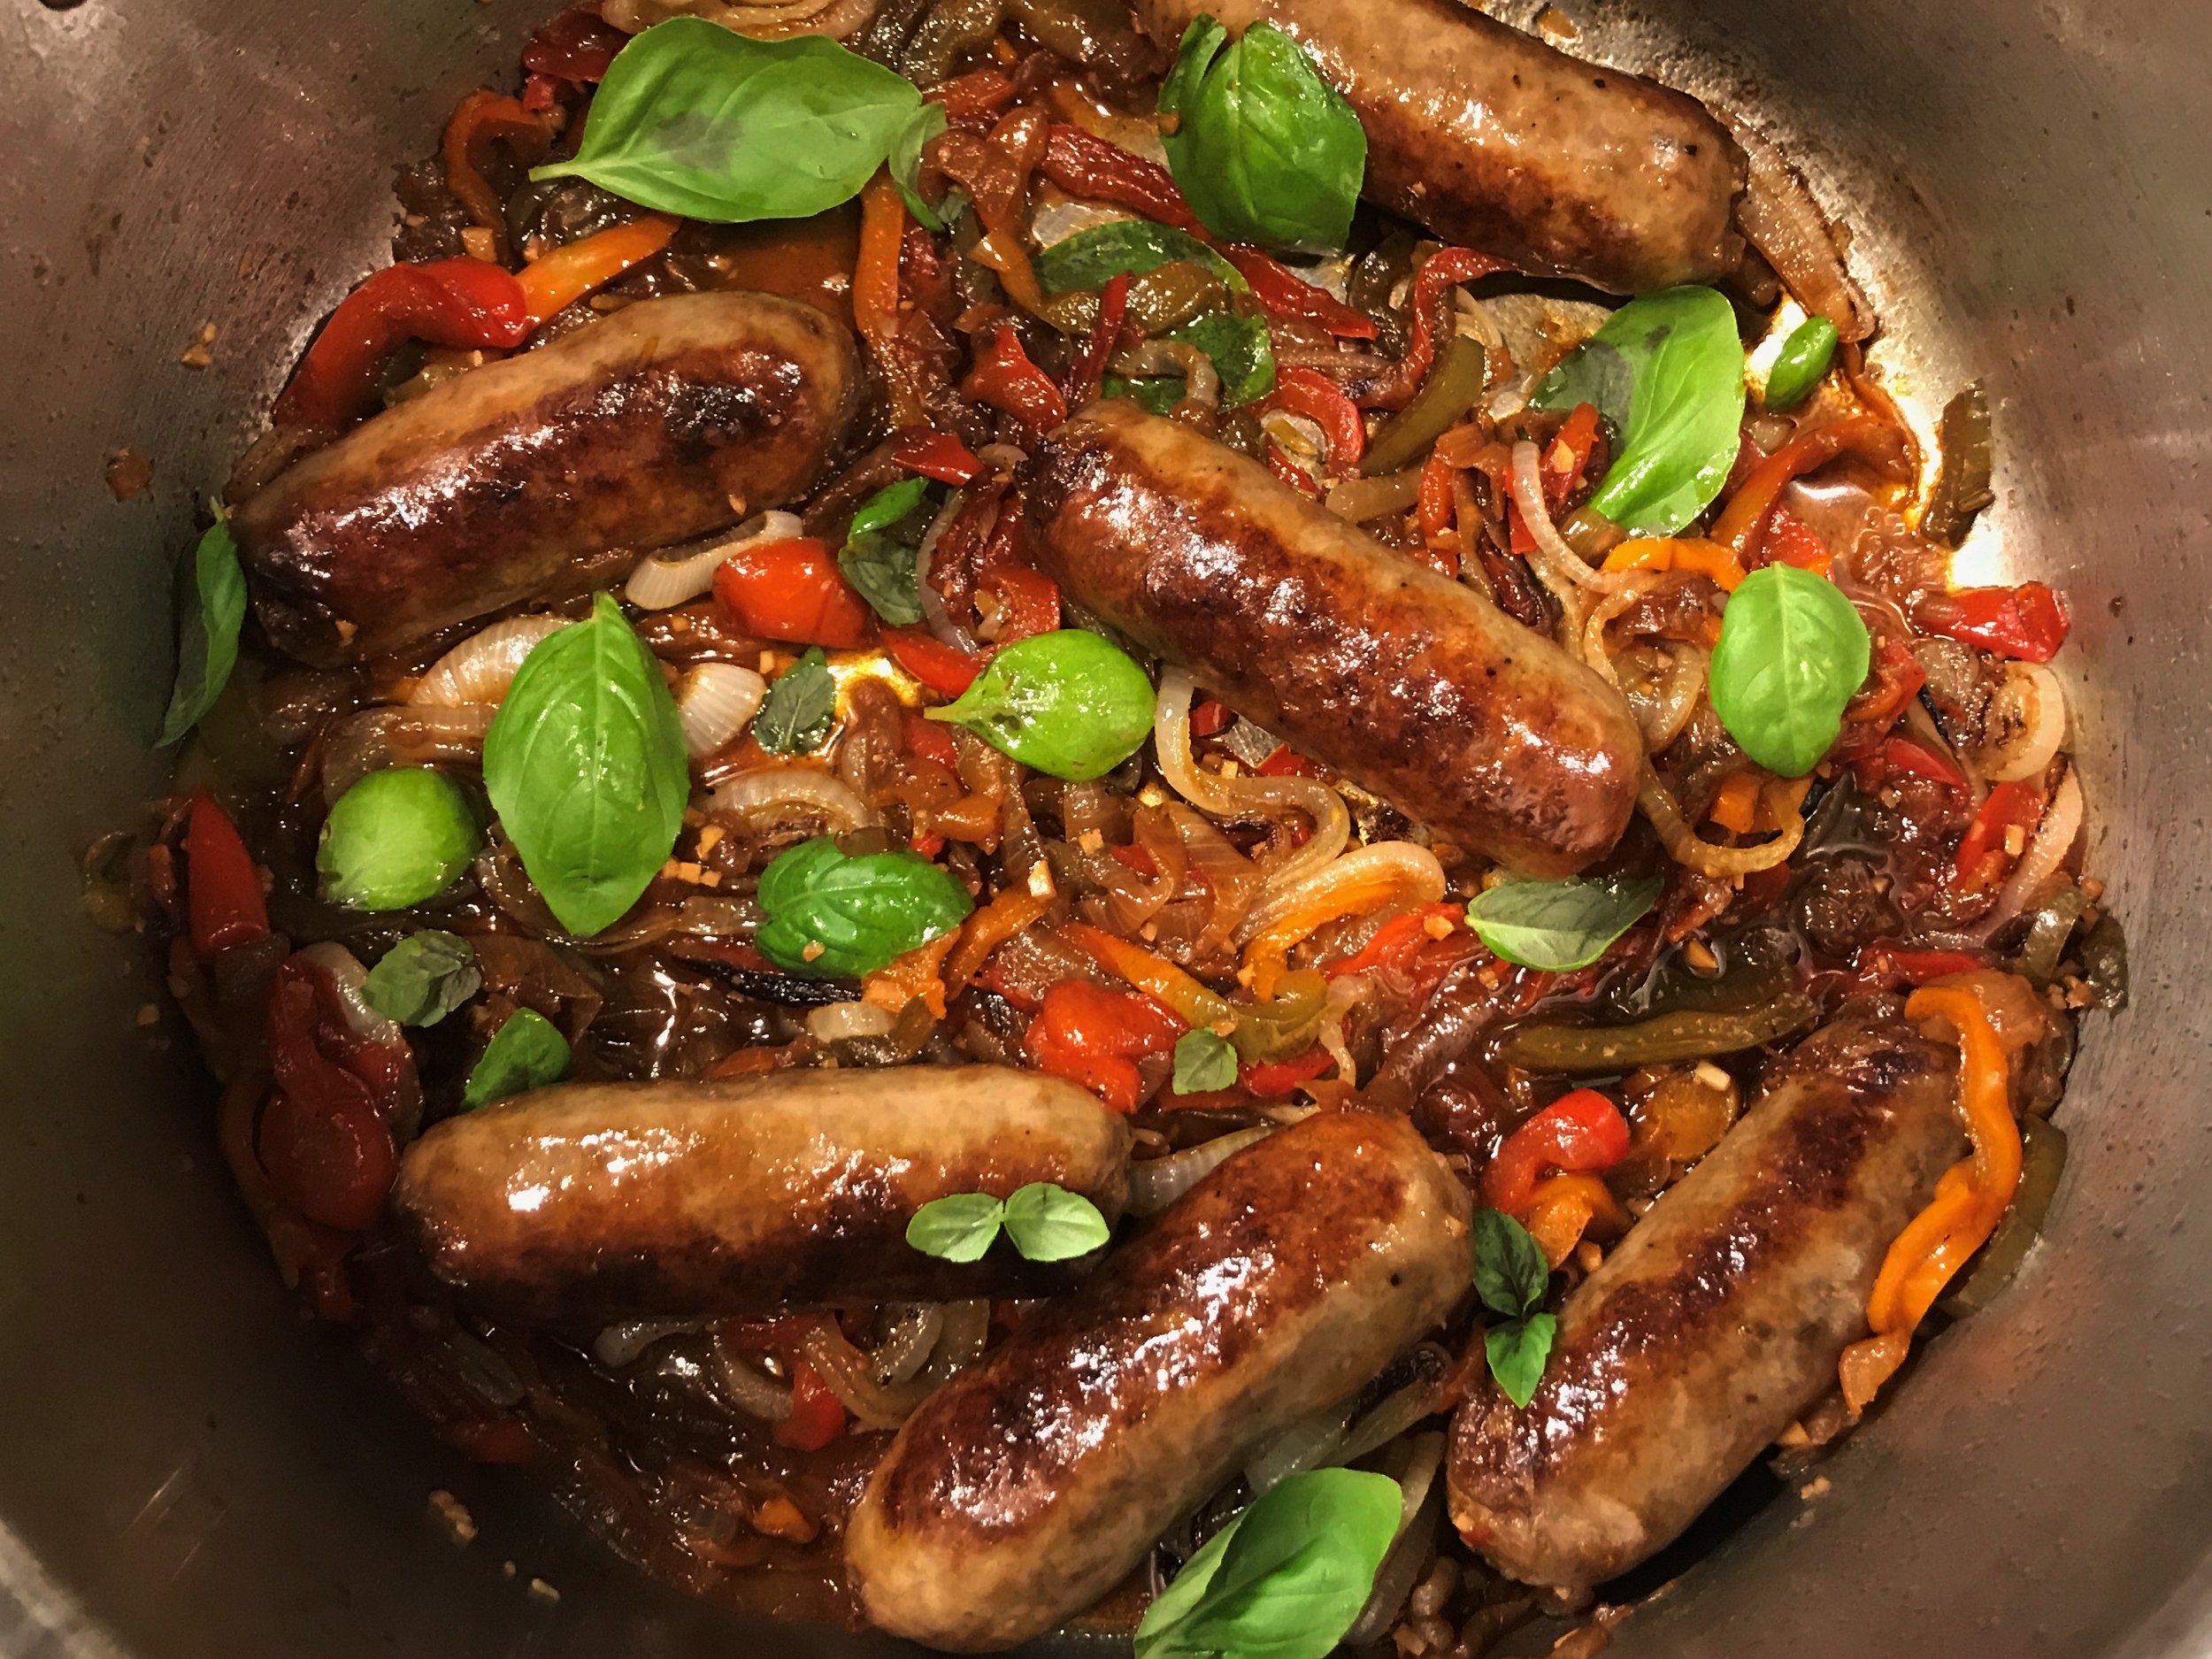 https://images.squarespace-cdn.com/content/v1/53f66561e4b07ba743a341fe/1507326612126-SNOECBXG9RADOBNXYCOV/Easy+Sausages+with+Peppers+and+Onions.jpg